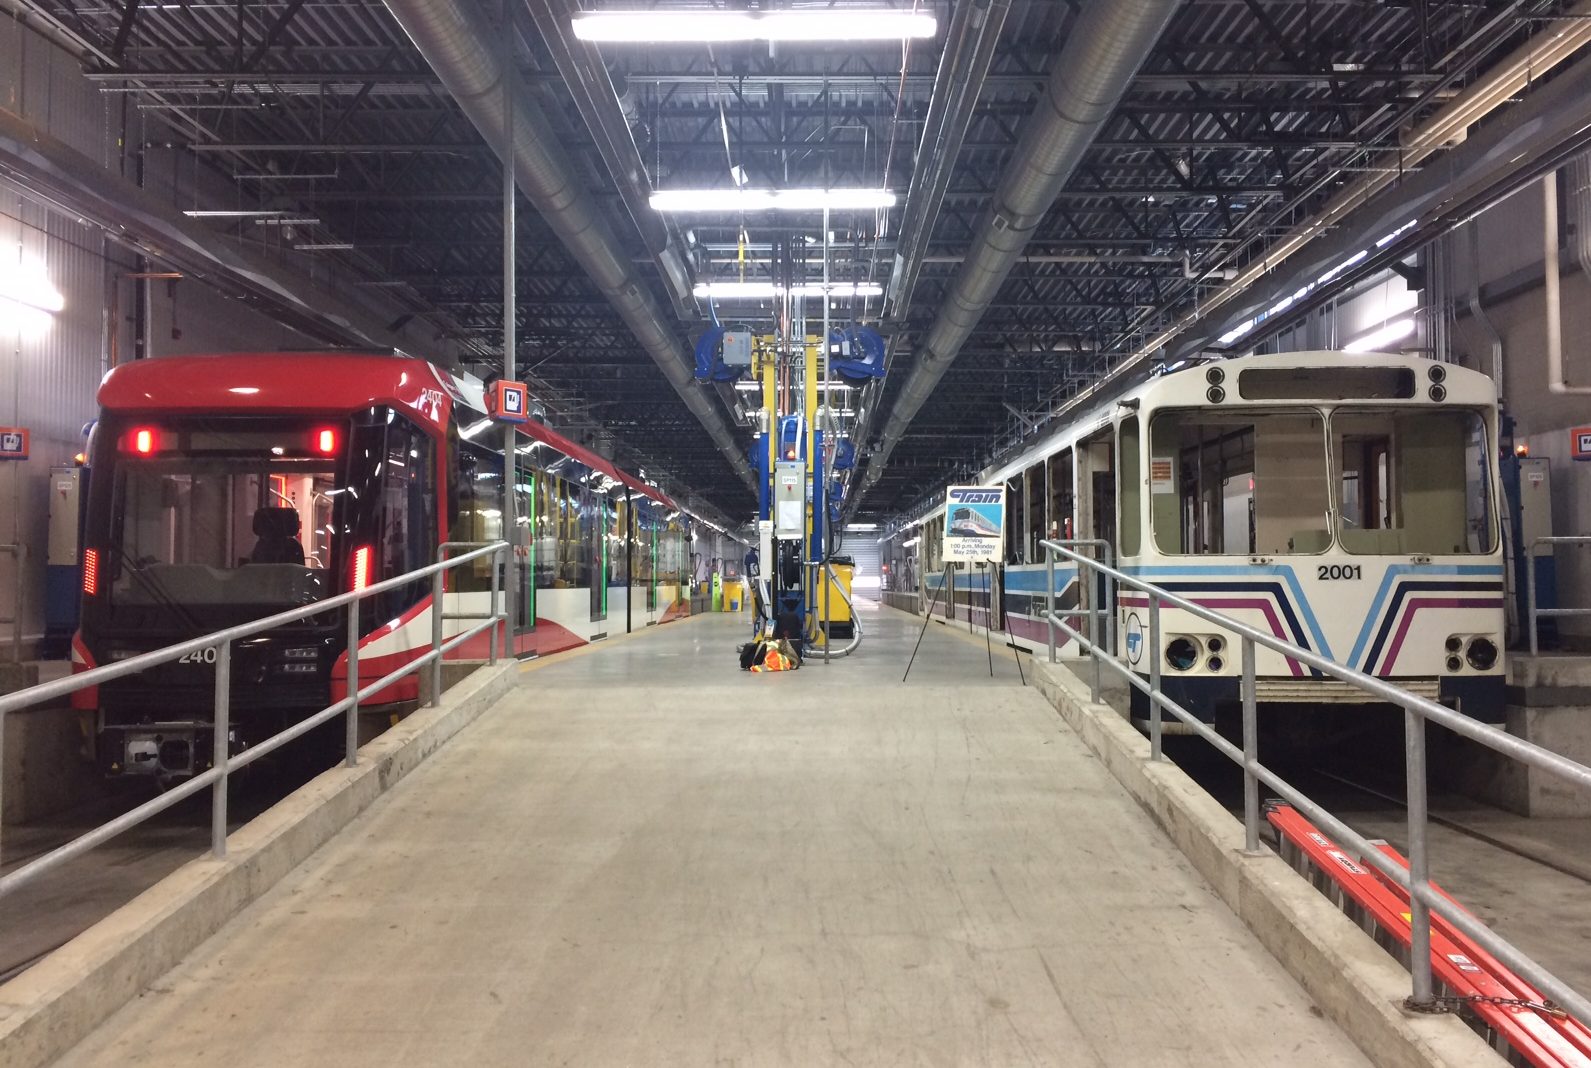 A new S200 LRV on the left with the first Car 2001 on the right, parked in the Maintenance and Storage Facility.